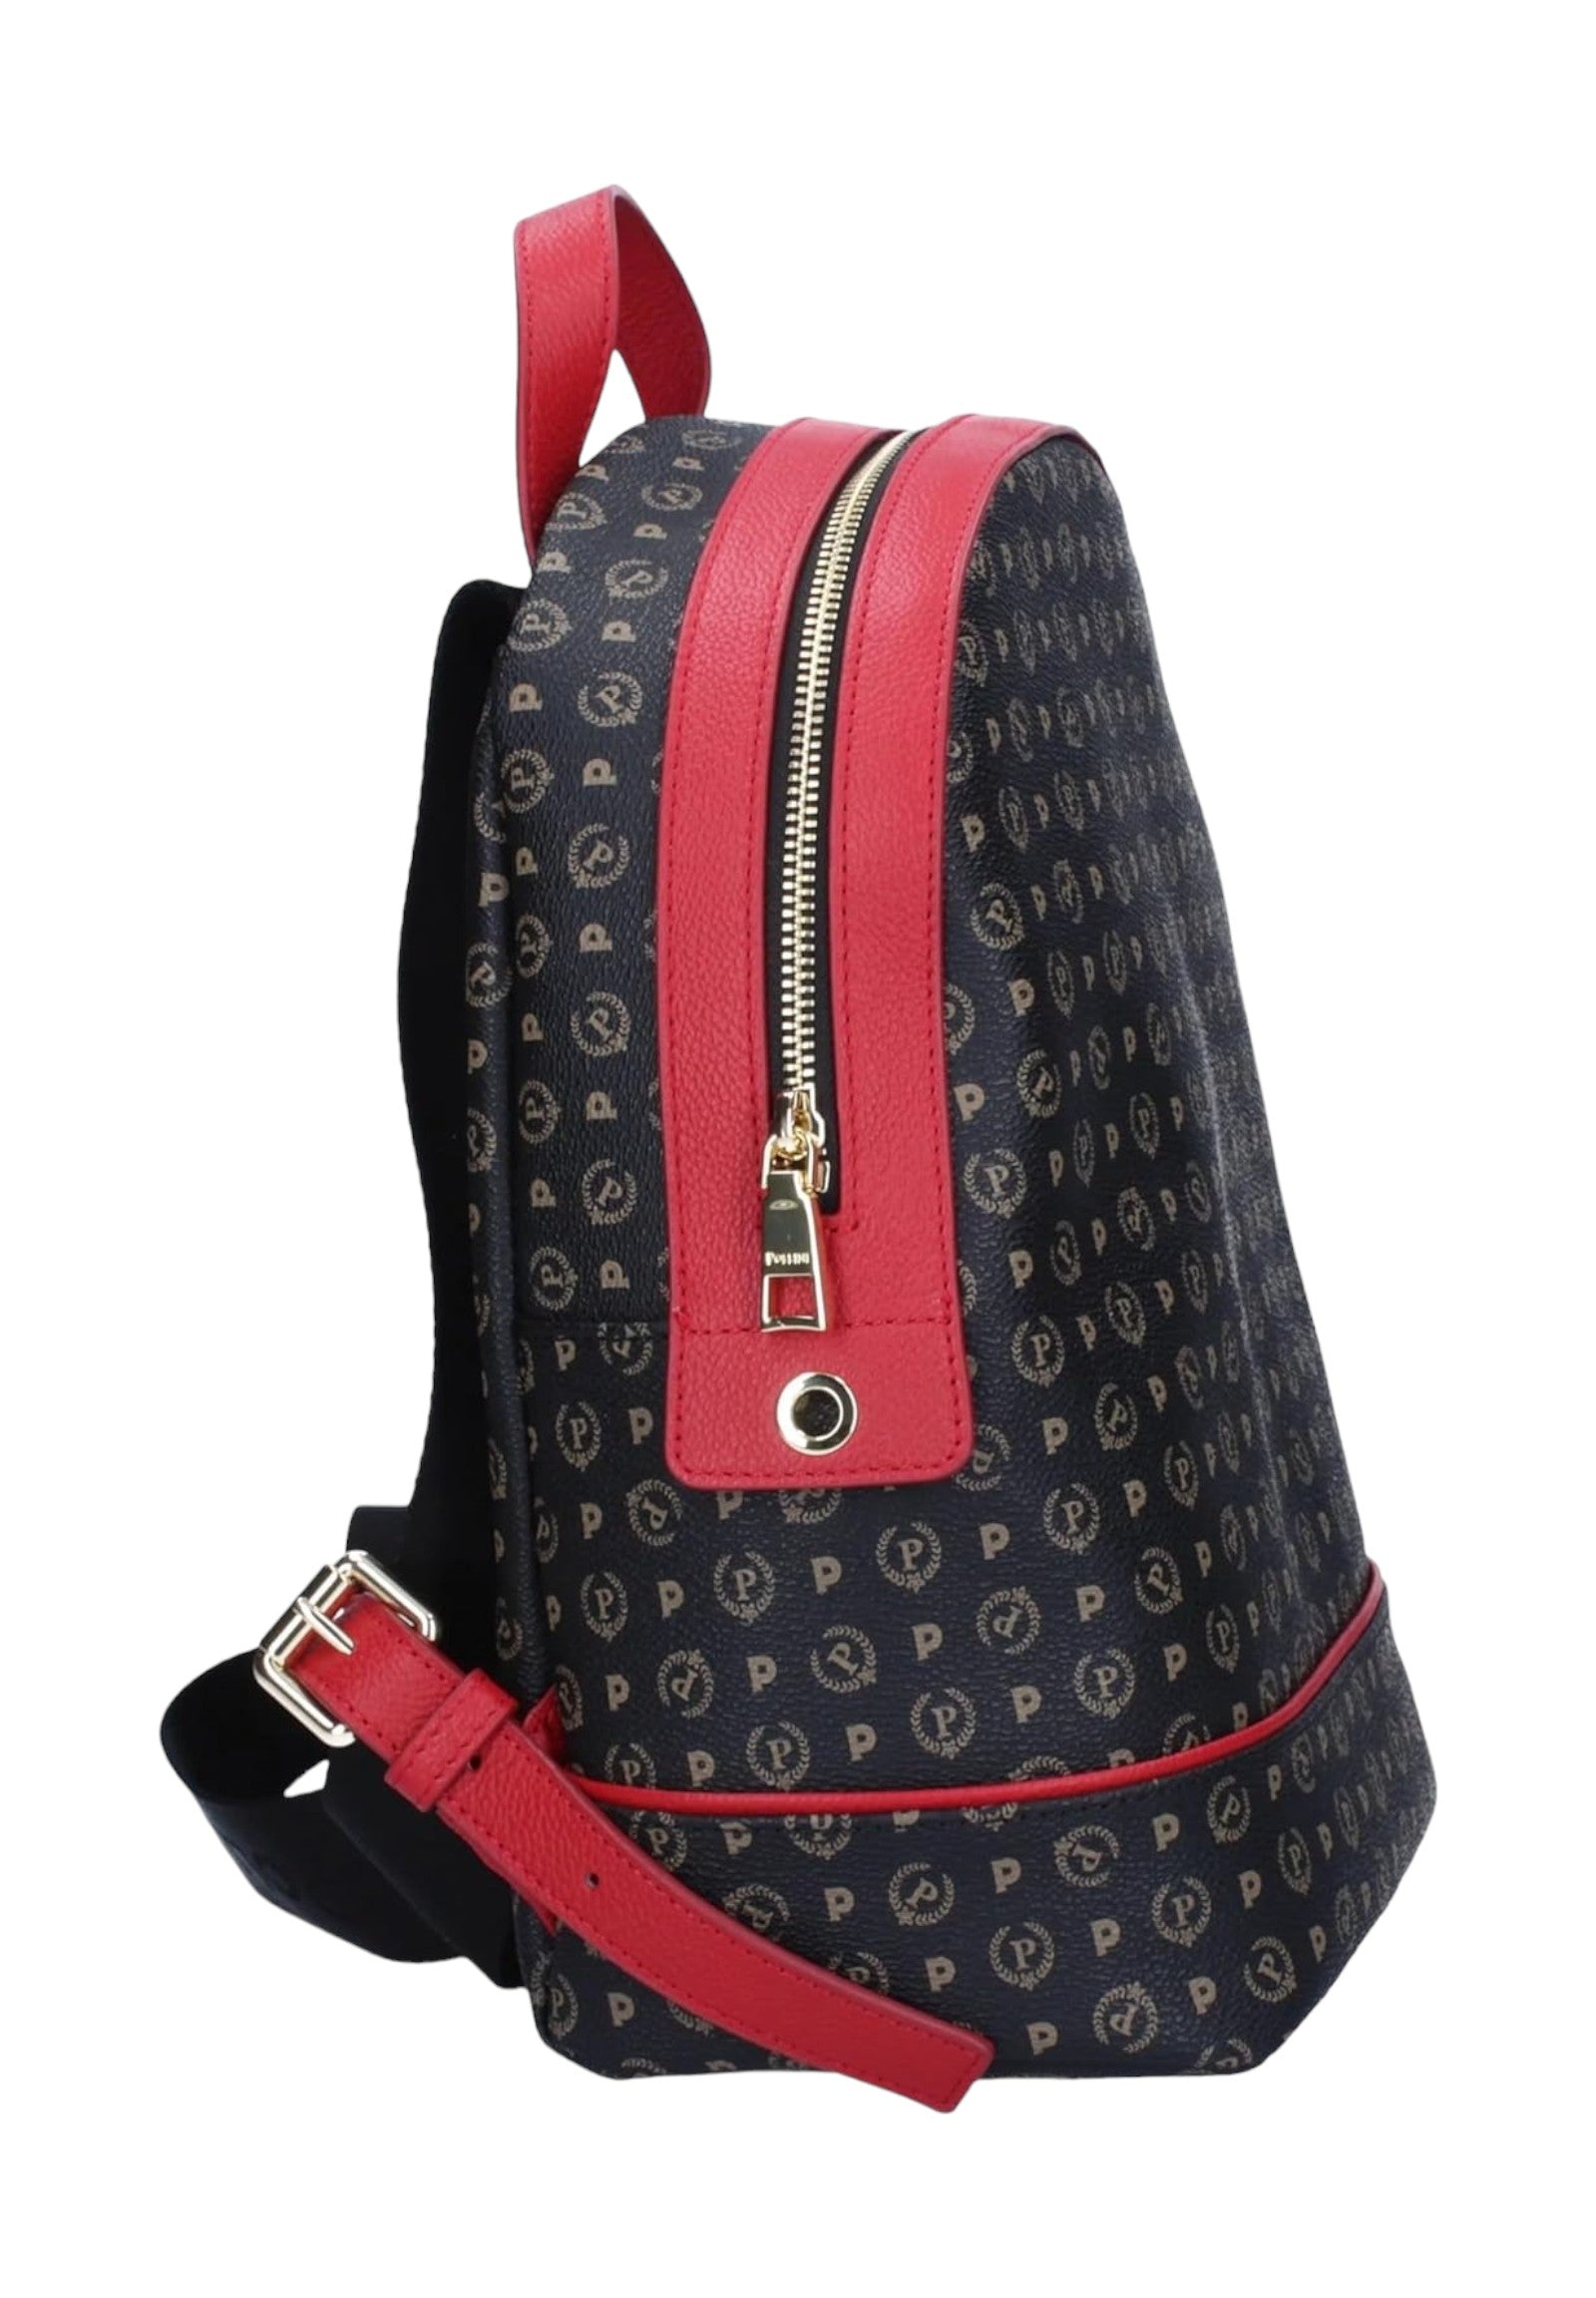 Backpack Te8432pp07 Black, Lacquer